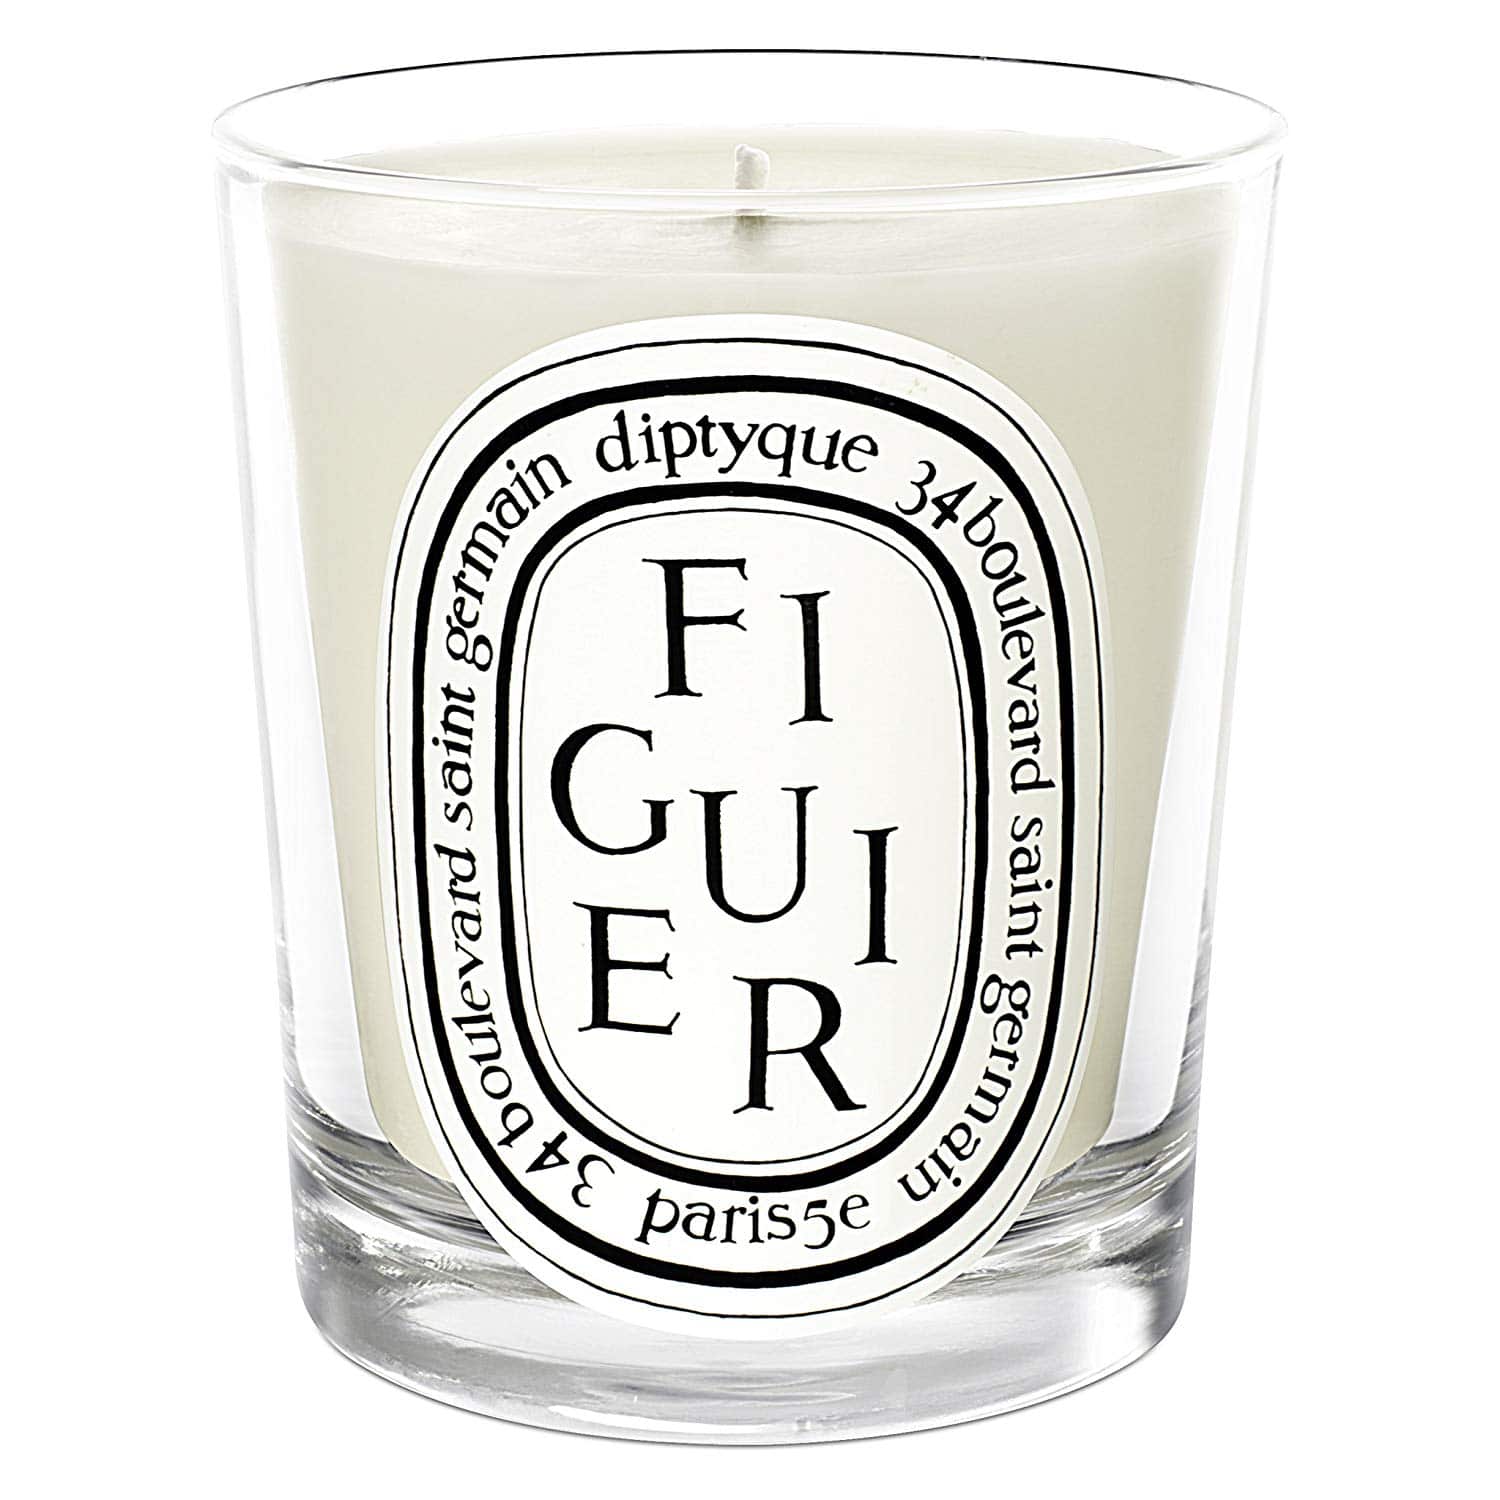 candle delirium, luxury candles, candle brands, best candle brands, expensive candles, high end candles, candles online, most expensive candles, best scented candle brands, best candles, online candle store, luxury candle brands, best luxury candles, candle shop near me, luxury scented candles, candle delerium, candle store near me, popular candle brands, top candle brands, expensive candles brands, elegant candles, most popular candle brands, designer candles, most expensive candles in the world, high quality candles, buy candles online, candle shop online, top rated candle brands, fancy candles, candledelirium com, good quality candle brands, candles west hollywood, luxury candles usa, designer candle brands, best candles in the world, premium scented candles, most expensive candle brands, designer scented candles, special candles, candle store west hollywood, best scented candles in the world, best smelling candle brands, line of candles, luxury soy wax candles, candle websites, candle emporium, gift candles online, best candle companies, nice candles, fine candles, most luxurious candles, candles online shopping, candle store, candle delirium west hollywood, top candles, candle store los angeles, online candle outlet, best french scented candles, the candle emporium, top candle companies, candle shop, candles online sale, best french candles, soy candle brands, high end scented candles, quality candles, good scented candles brands, luxury pillar candles, luxury candles online, expensive scented candles, love candles online, premium candles, designer candles online, upscale candles, famous candle brands, where to buy candles online, luxury candle company, designer fragrance candles, scented candles usa, hollywood candles, candles los angeles, voluspa private label, destination candles, famous candle company, good smelling candles, best designer candles, large scented candles, great candle gifts, beautiful candles online, stylish candles, candles santa monica, candle store santa monica, best candles to buy, perfumed candles online, designer candles wholesale, purchase candles online, best candles to buy online, best candles for home, candle store los angeles ca, good quality candles, luxury french candles, order candles online, best selling luxury candles, discount candles los angeles, good candle brands, top rated candles, best fragrance candles, famous candles, soy candles online, online candle store australia, seda candles wholesale, branded scented candles, aroma candle shop, luxury scented candles wholesale, what is the best scented candle brand, candle shopping, popular candle companies, scented candle brands, good scented candles, best smelling candles ever, expensive candles uk, what is the best candle brand, best scented candles online, exclusive candles, most fragrant candles, strongest smelling candles, trendy candles, best luxury scented candles, famous candle makers, expensive candles uk, good quality candles, best scented candles, luxury candle copany, upscale candles, best rose candle, urban chic candles, top candle brands, roam candle, stylish candles, cool candle names, luxury home fragrance brands, most luxurious candles, ost expensive candle brands, soy candle brands, best candles canada, elegant candle names, luxury french candles, best candle brands, exclusive candles, designer candle brands, luxury soy wax candles, best selling luxury candles, top candle companies, luxury candles usa, best candles in the world, expensive candles brands, most expensive candles in the world, candle brand naes, high quality candles, best french scented candles, best candles, luxury scented candles, best designer candles, luxury soy candles, designer candles, best french candles, quality candles, most expensive candles, best candle brands 2015, luxury candle brands, best luxury candles, expensive candles, candle brands, high end candles, bloomingdales candles, extra large candles, diptyque candles review, baies candles, diptyque candles sale, most popular diptyque candle, best diptyque candle, jo malone candles vs diptyque, diptyque vs jo malone, best le labo candle, best orange blossom candle, kardashian candles, why are diptyque candles so expensive, famous candles, best voluspa scent, voluspa candles review, voluspa candles, voluspa private label, oprah winfrey favorite candles, jo malone orange blossom candle, oprah's favorite candles, best rose candle, yankee candle quotes, my favorite candles, voluspa candles sale, most popular voluspa candle, voluspa best sellers, baobab candles review, candle like, best byredo candle scent, voluspa reviews, rigaud candles, taylor candle company, neiman marcus candles, famous people naked, are jo malone candles soy strongest scented candles 2017, best cire trudon candle scent, celebrity home candles, byredo candles, best cire trudon scent, cire trudon most popular scent,